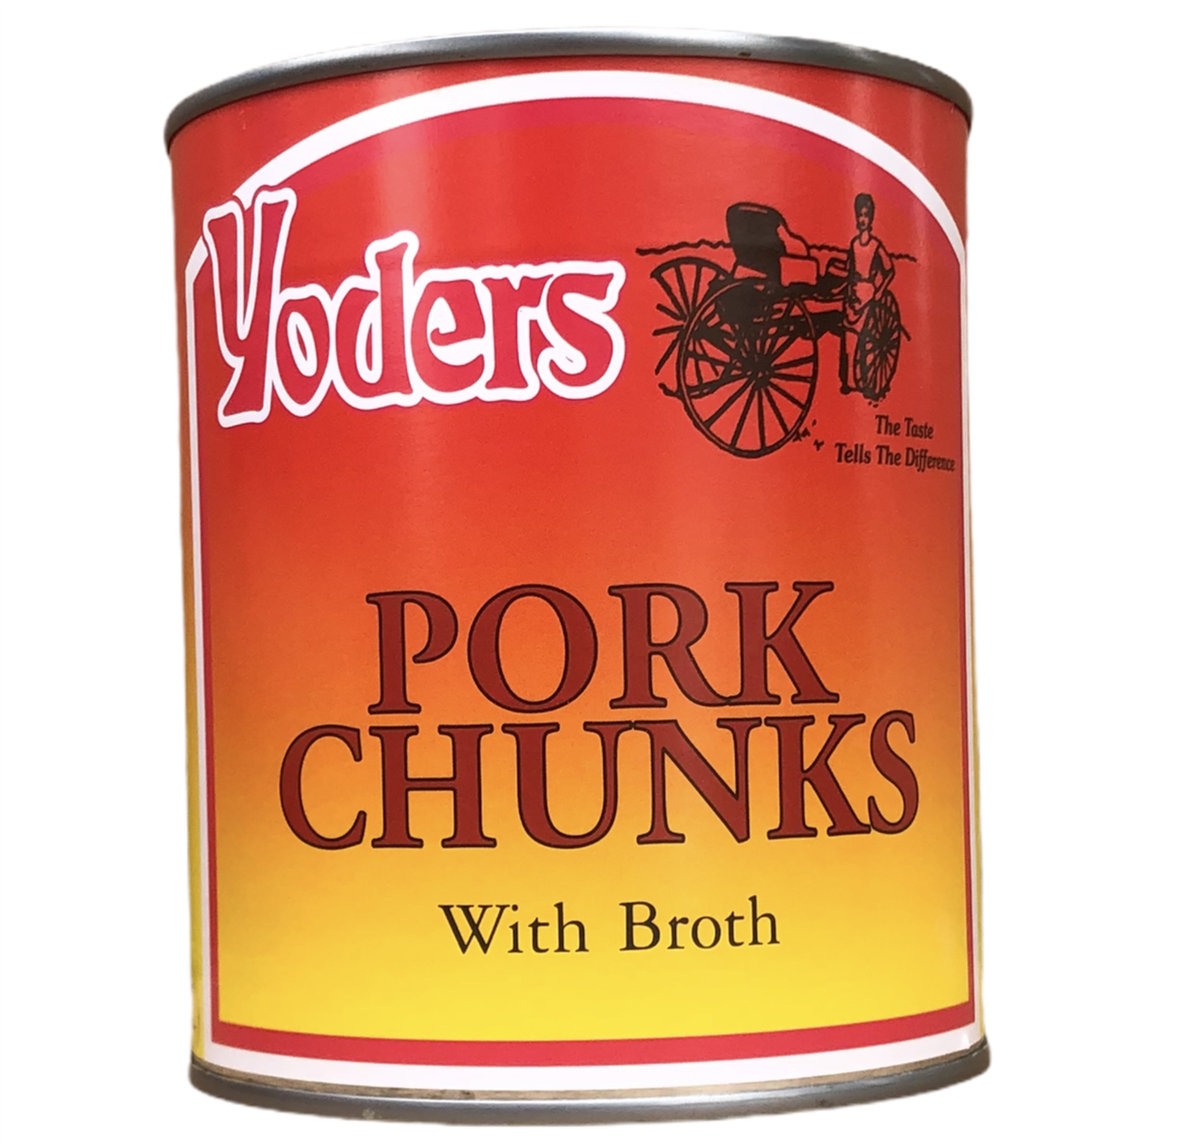 Case (12 Cans) of Yoder's fresh REAL Canned Pork Chunks